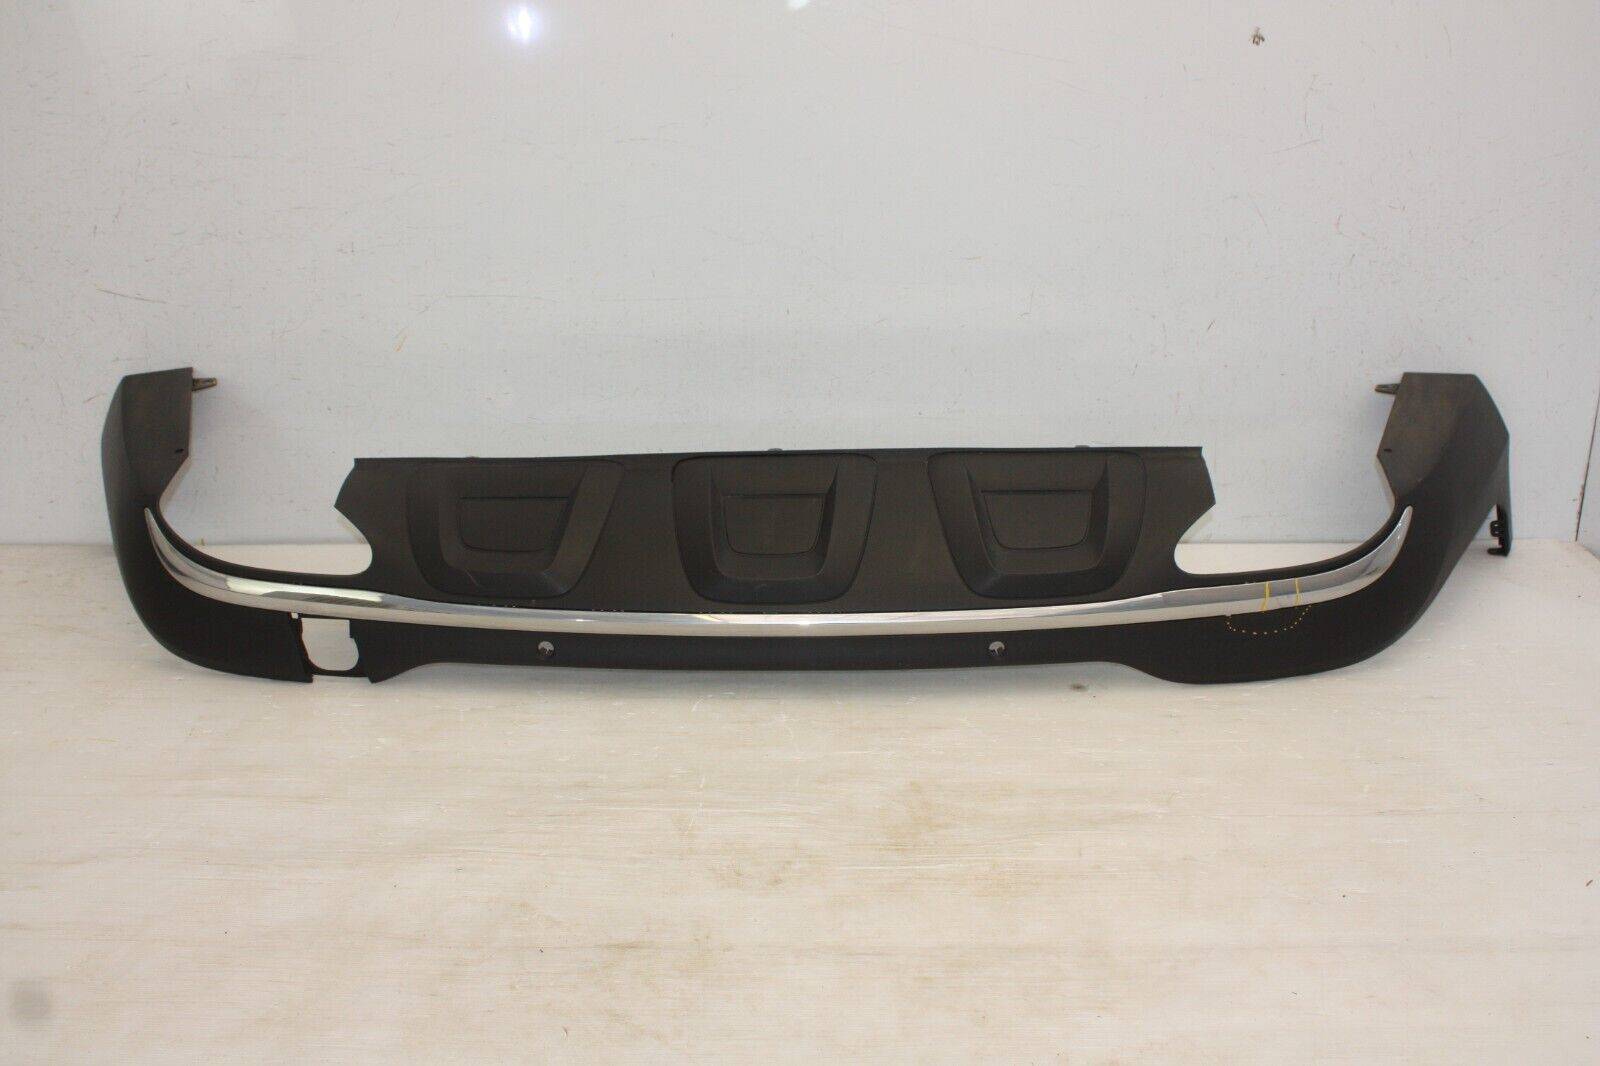 Mercedes-GLC-X253-AMG-Rear-Lower-Section-2015-TO-2019-A2538850300-DAMADED-175636163232